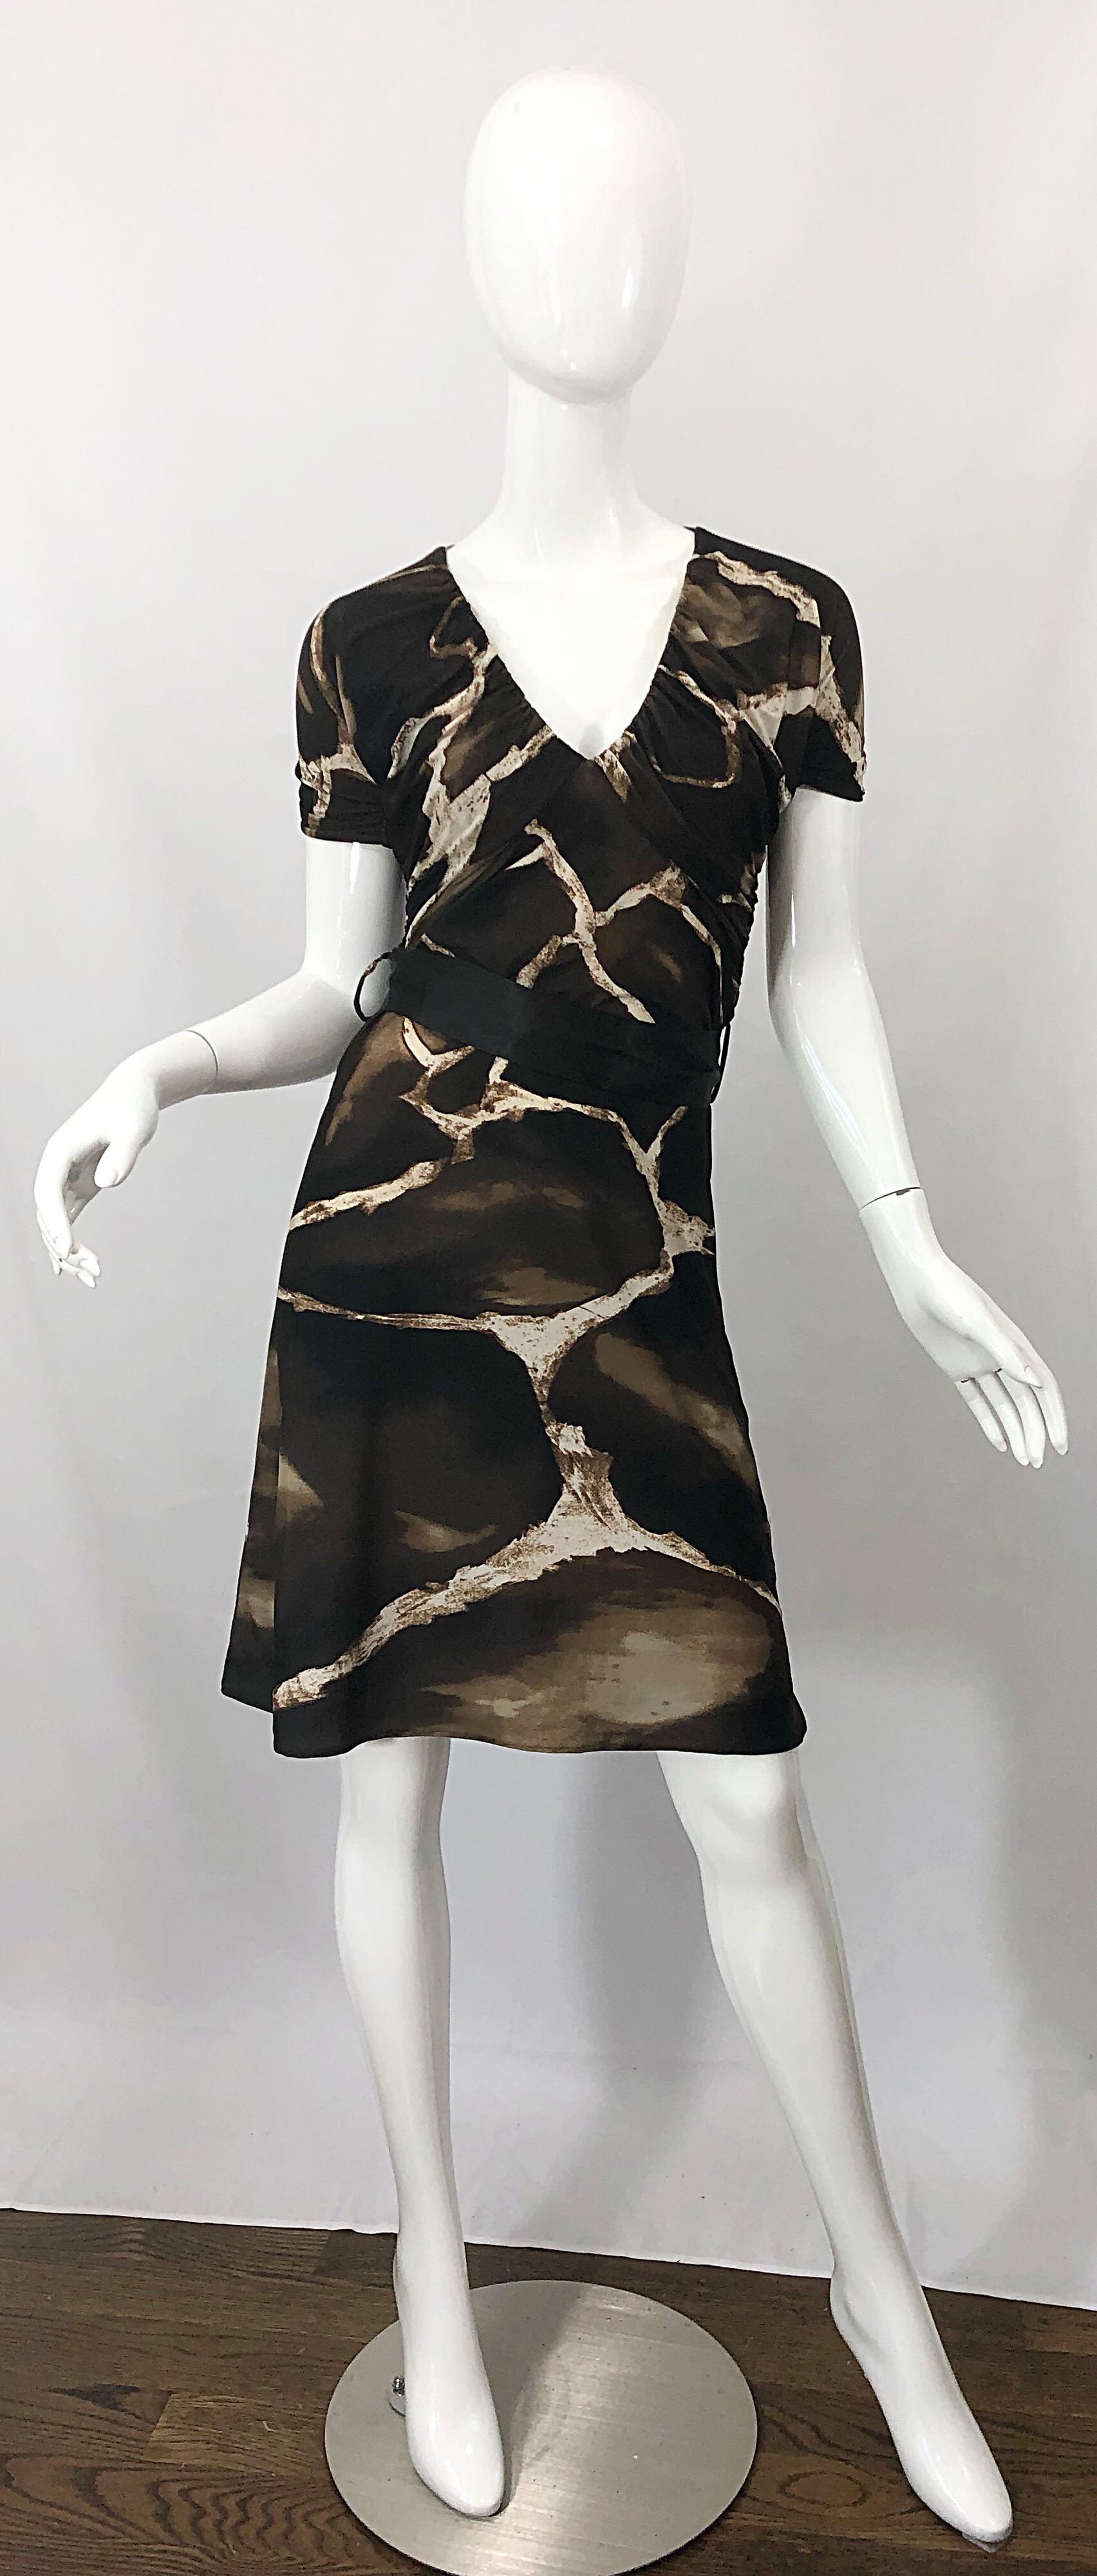 Chic and rare vintage mid / late 80s ROBERTO CAVALLI for NEIMAN MARCUS giraffe print belted short sleeve jersey dress! Features timeless giraffe animal print in chocolate brown and ivory. Flattering ruched tailored bodice and sleeves. Hidden zipper